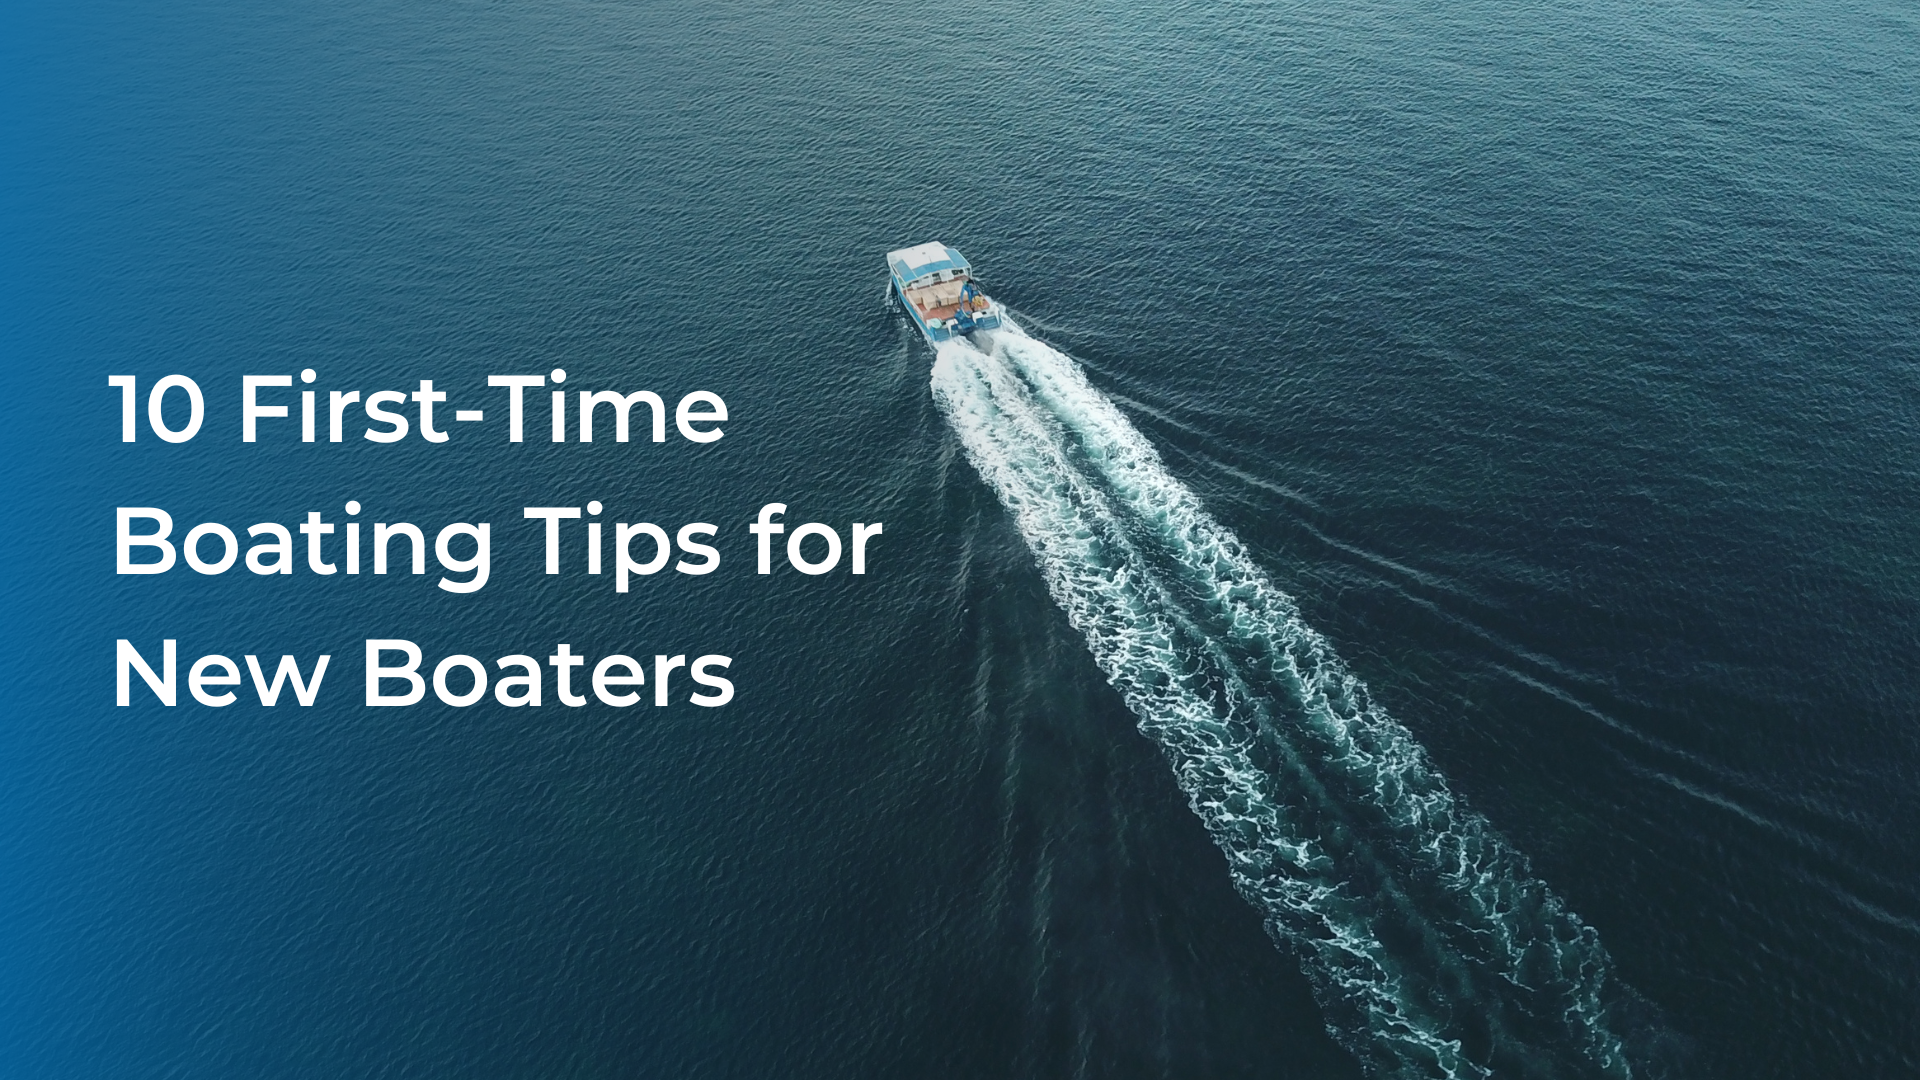 10 First-Time Boating Tips for New Boaters